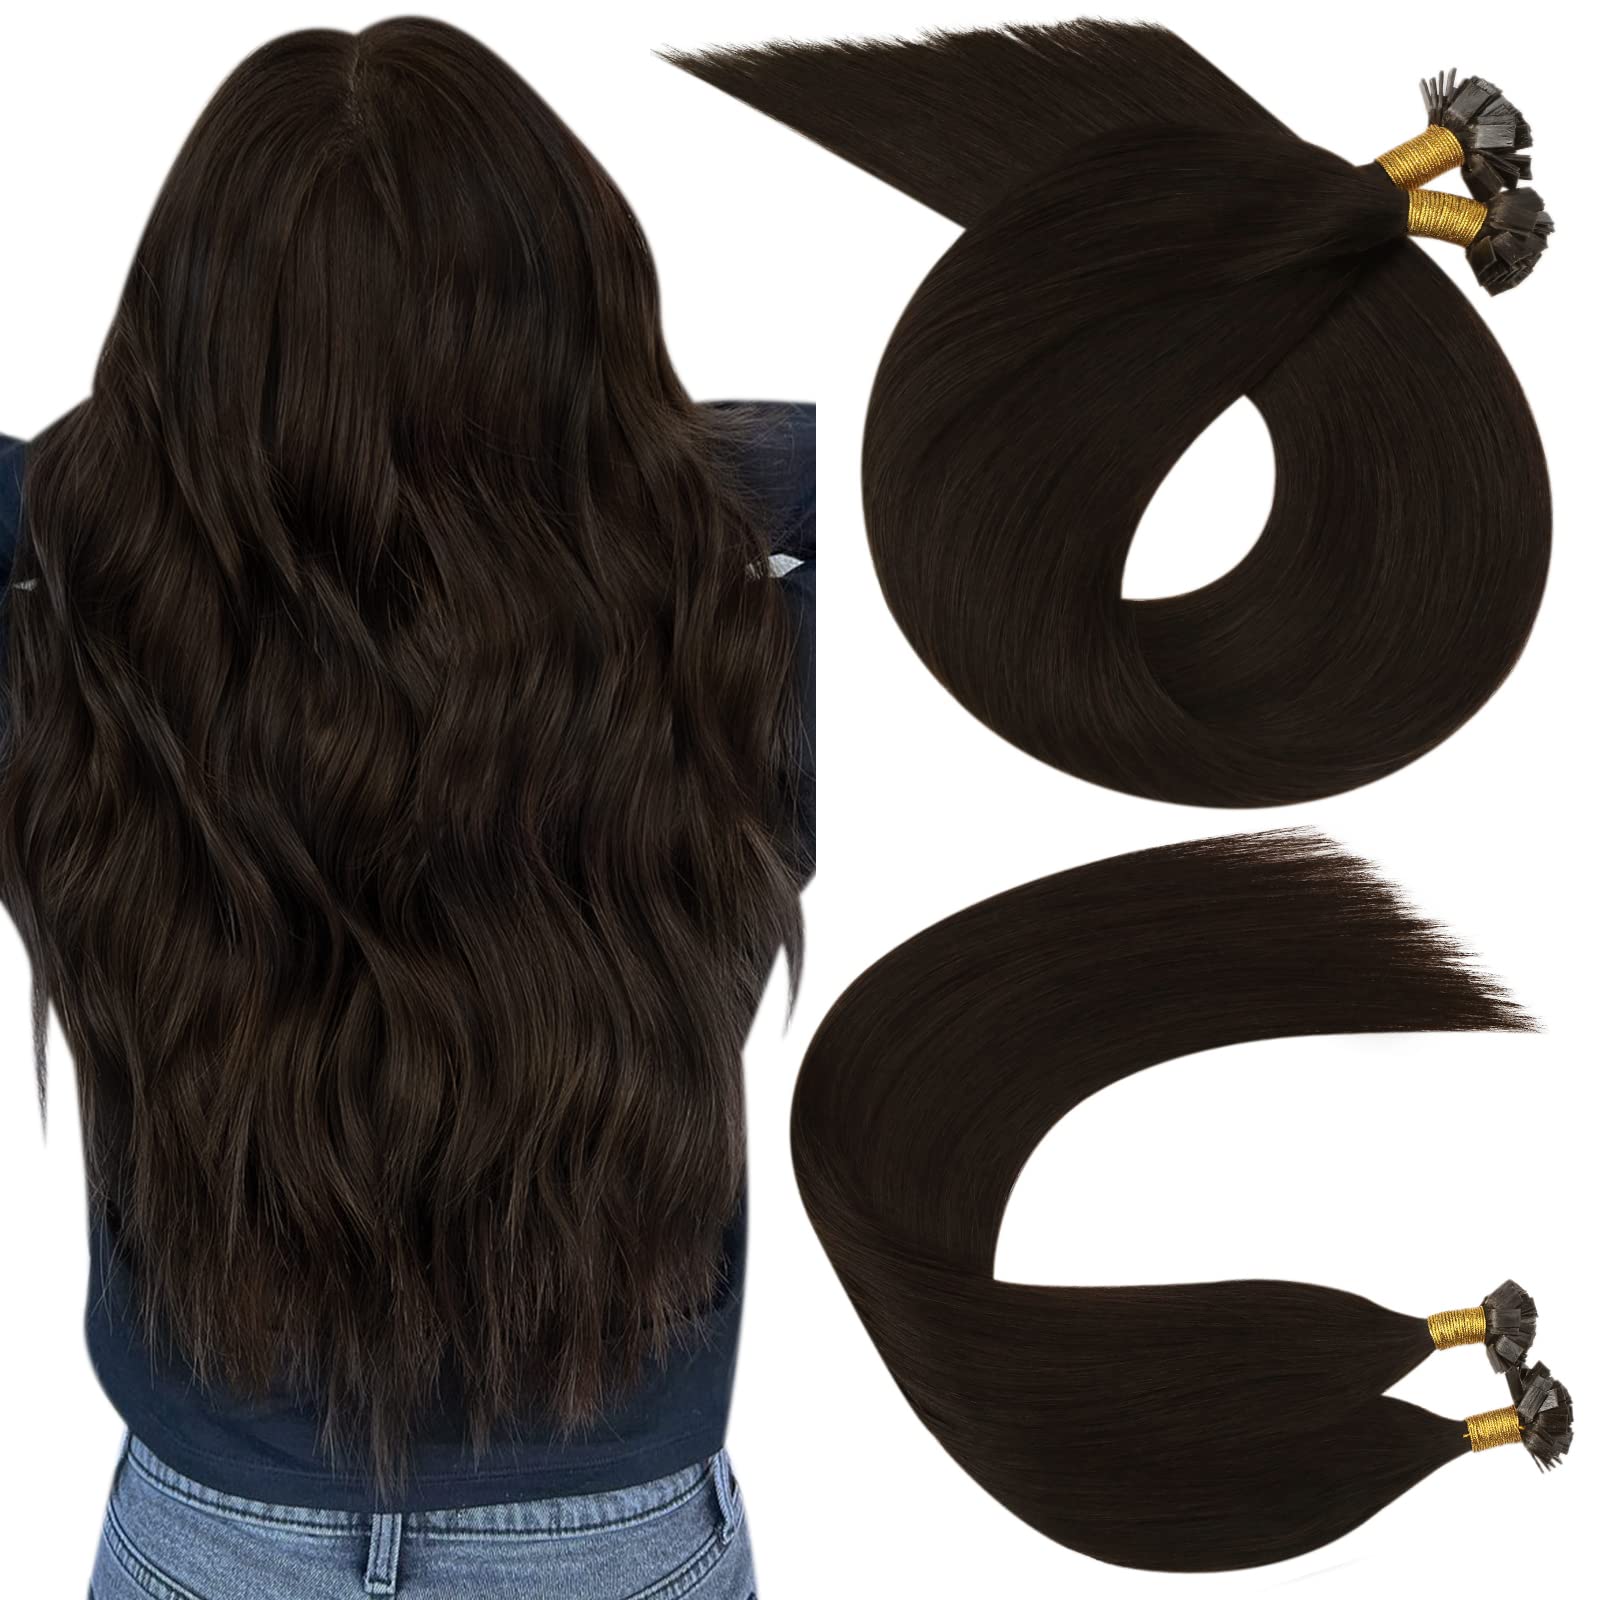 Ugeat Pre Bonded Hair Extensions 22 Inch Flat Tip Hair Extensions Human Hair #2 Darkest Brown Hair Extensions Hot Fusion Keratin Real Human Hair 50...